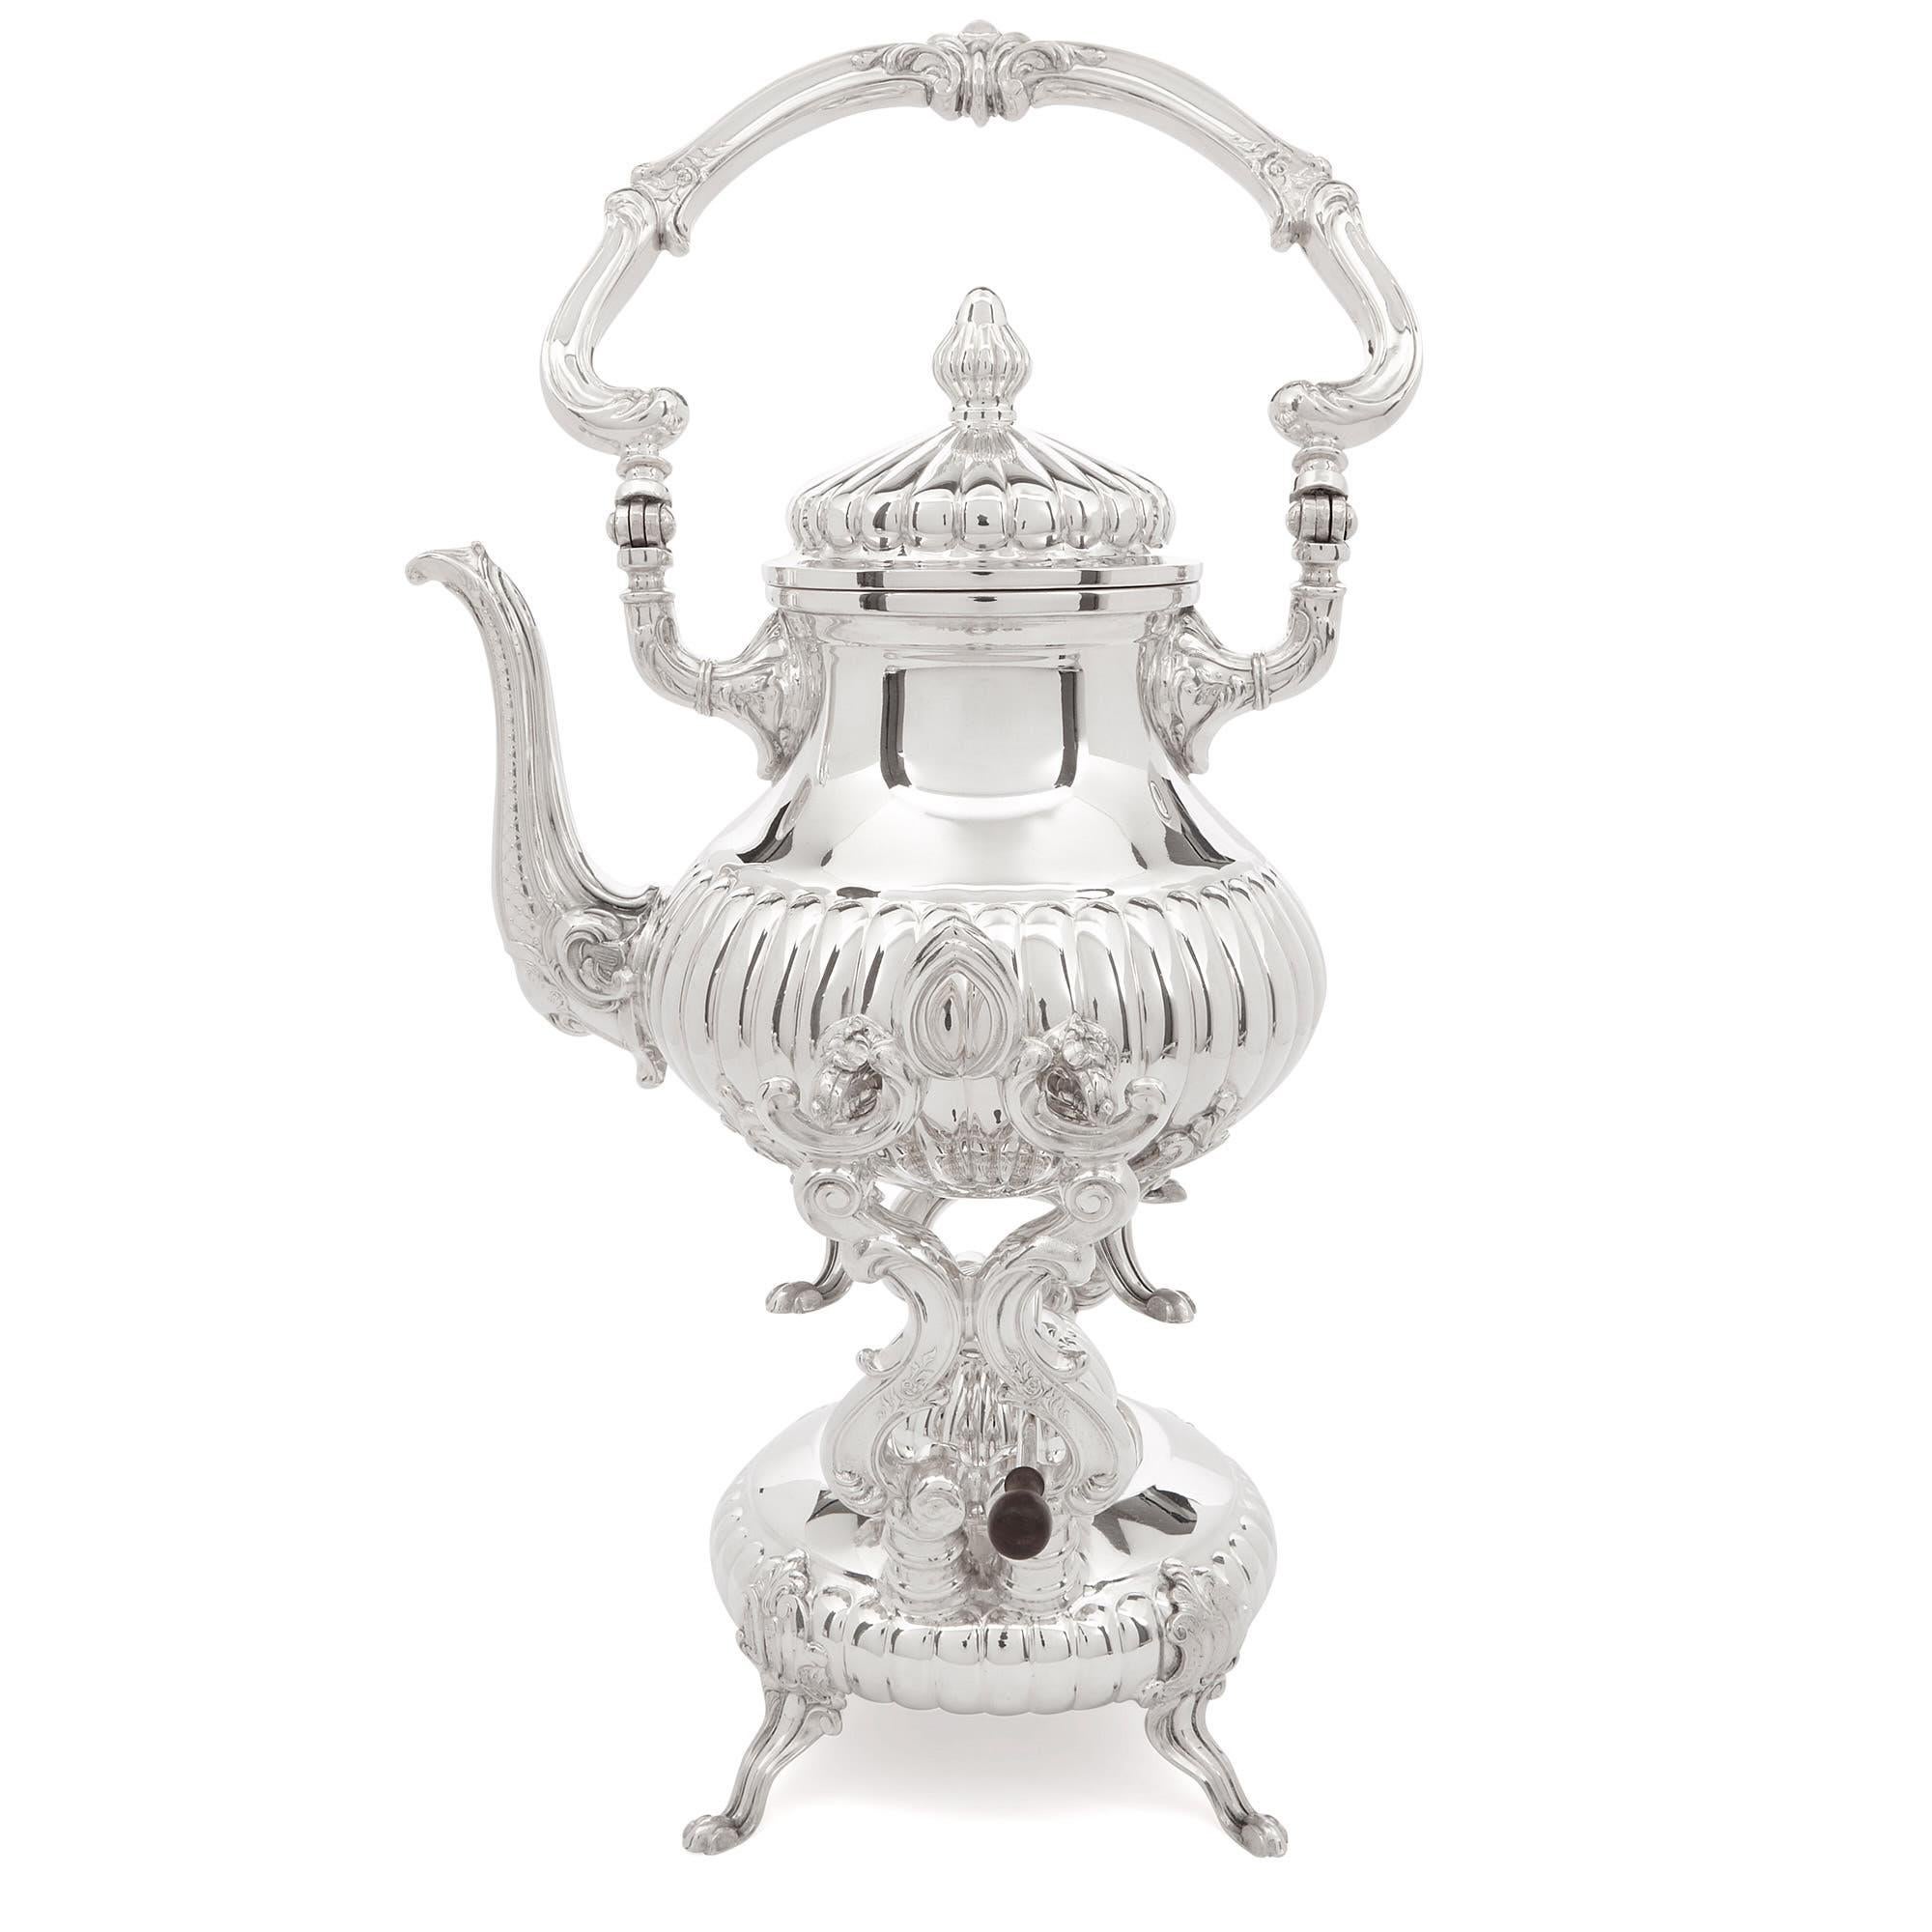 This sterling silver tea and coffee set is comprised of a tray, a kettle with a burner stand, a tea and coffee pot, milk jug, sugar bowl and a tea strainer in a bowl. The set is fully hallmarked and inscribed, ‘STERLING 975/CAMUSSO/MADE IN PERU’.